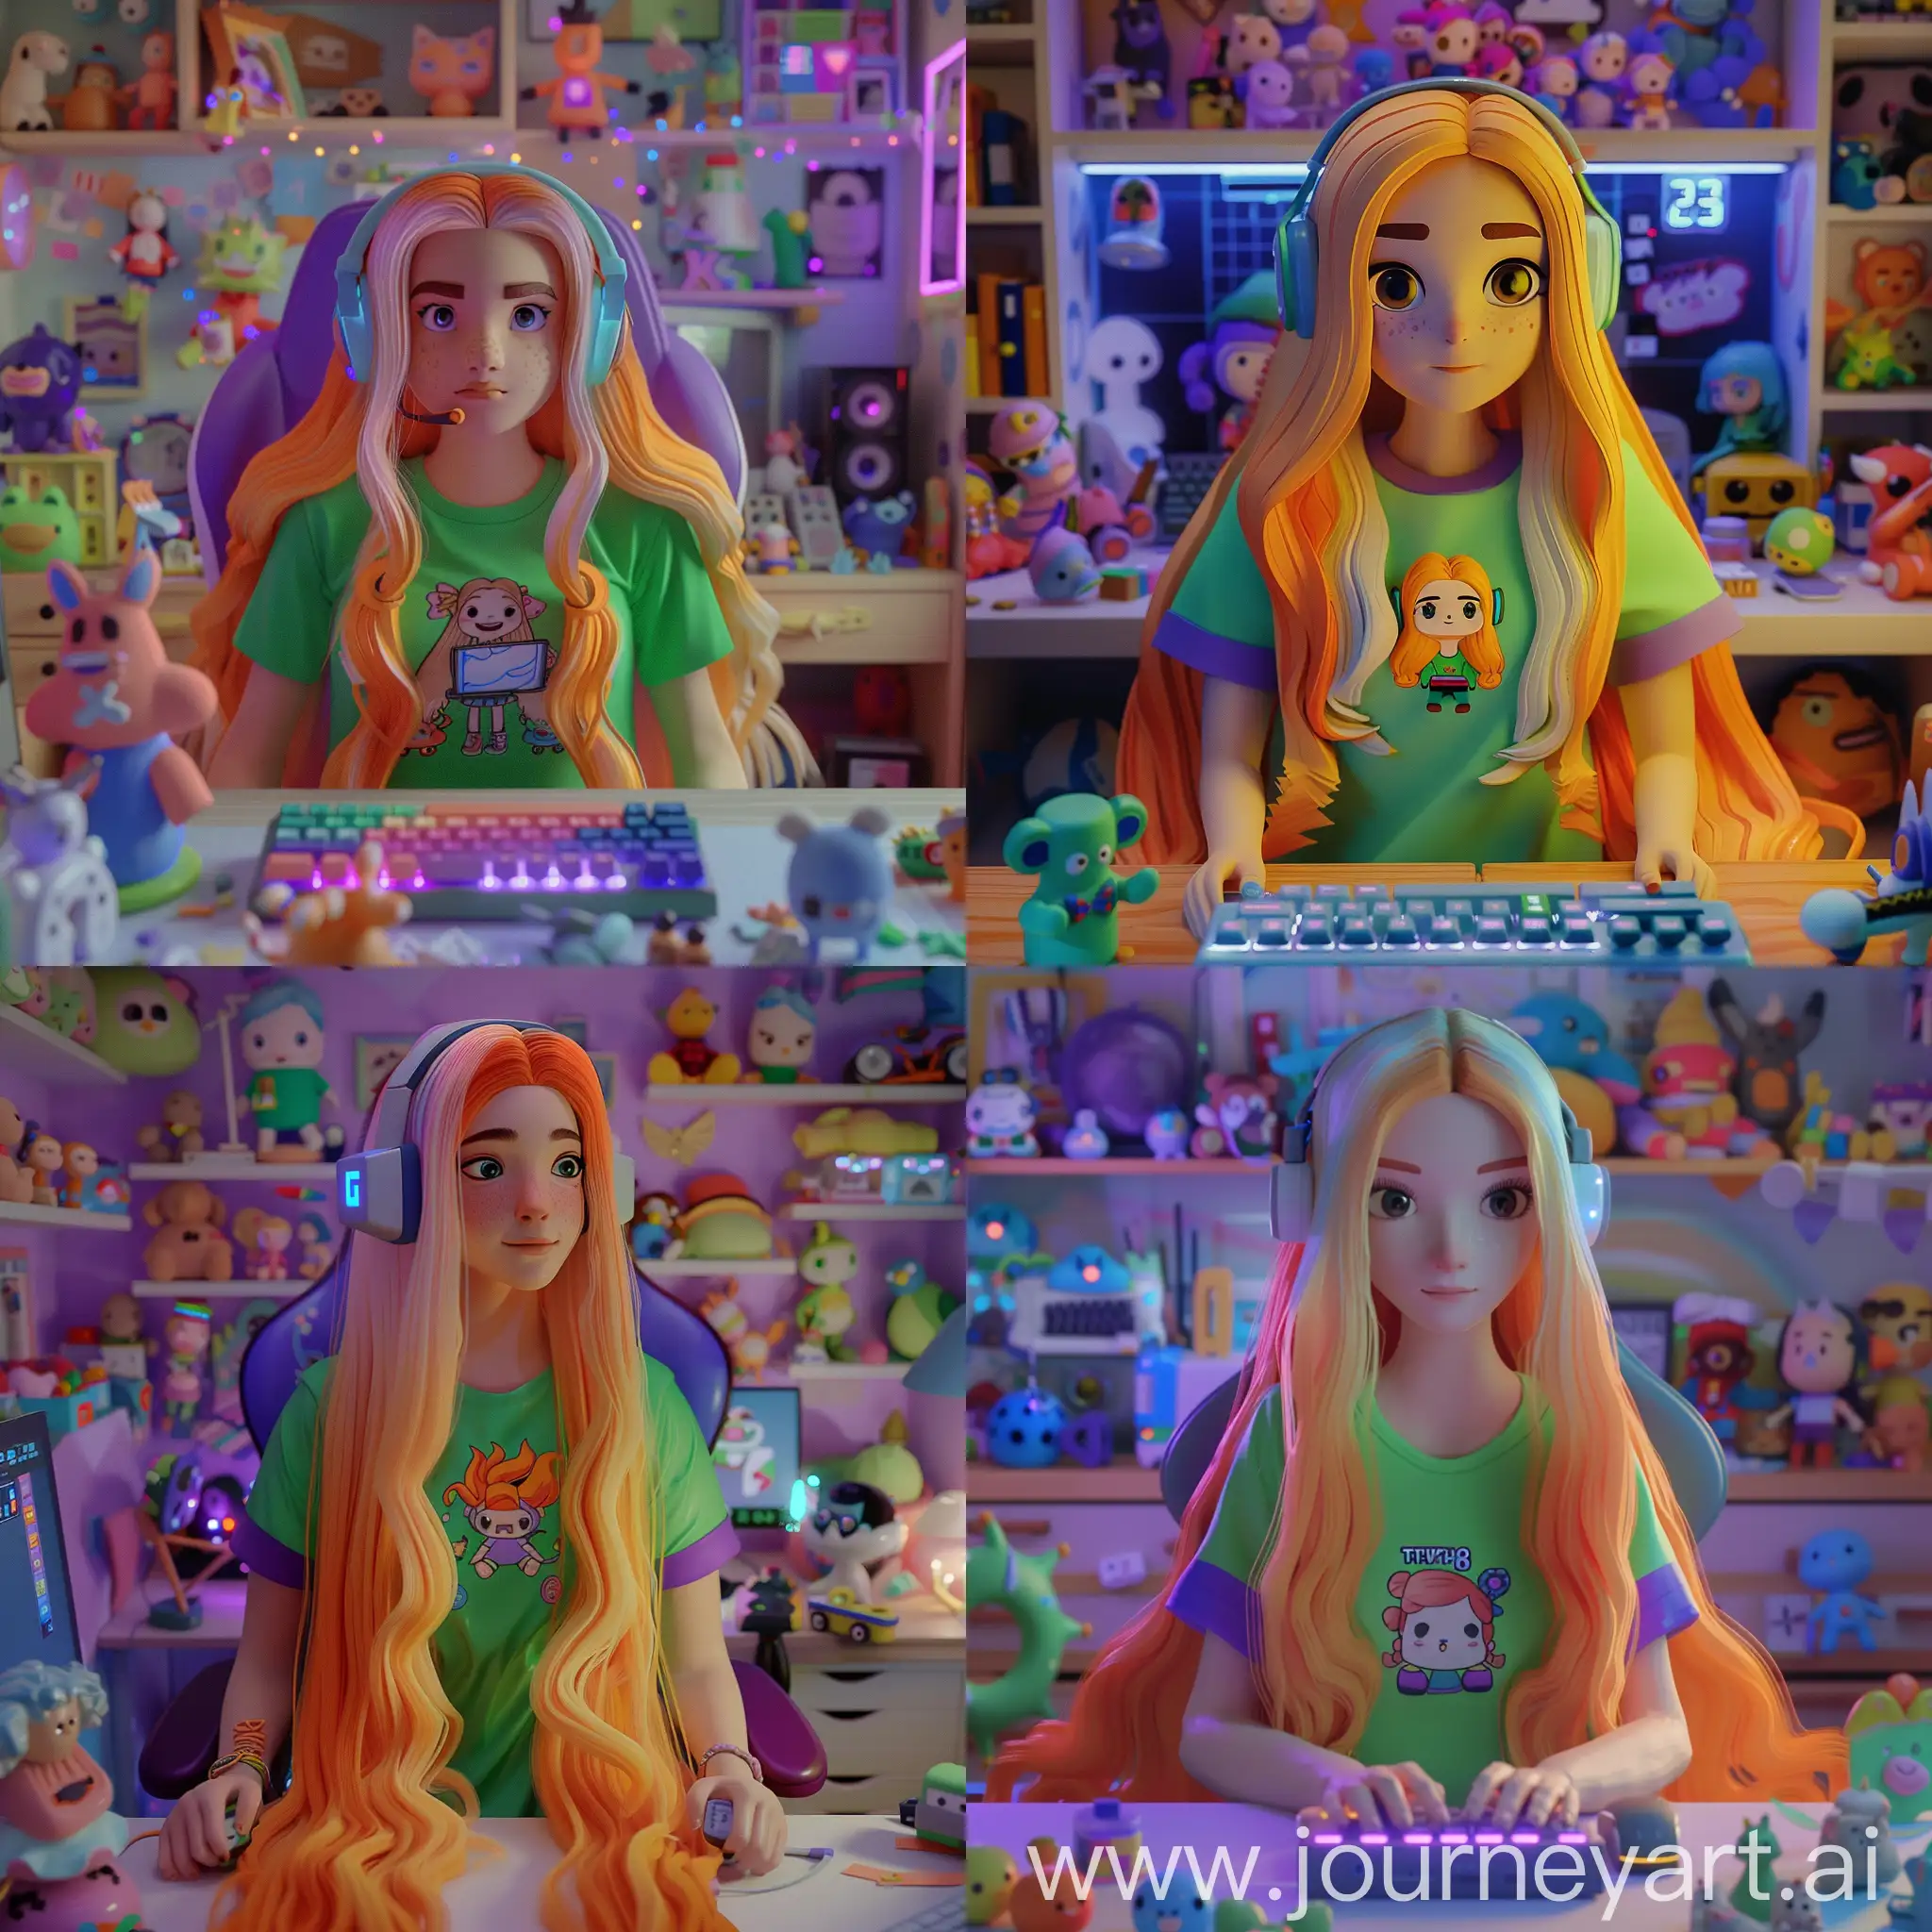 Colorful-Claymation-Twitch-Streamer-in-Cute-Bedroom